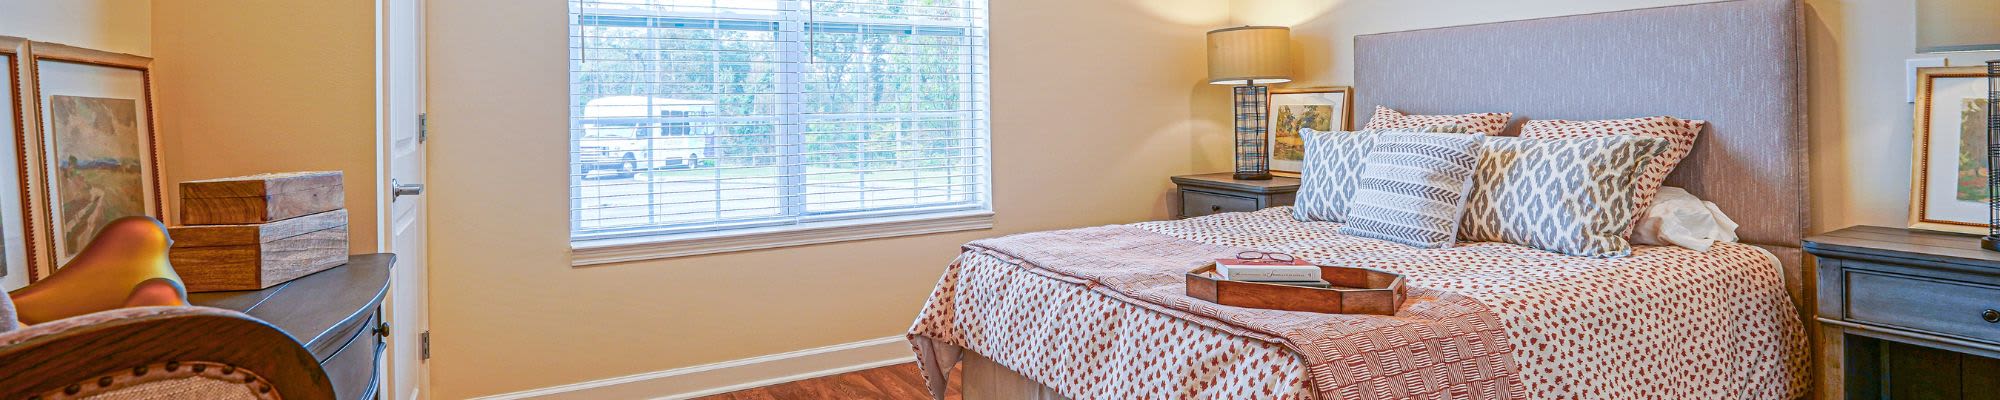 Independent Living at The Harmony Collection at Roanoke - Memory Care in Roanoke, Virginia